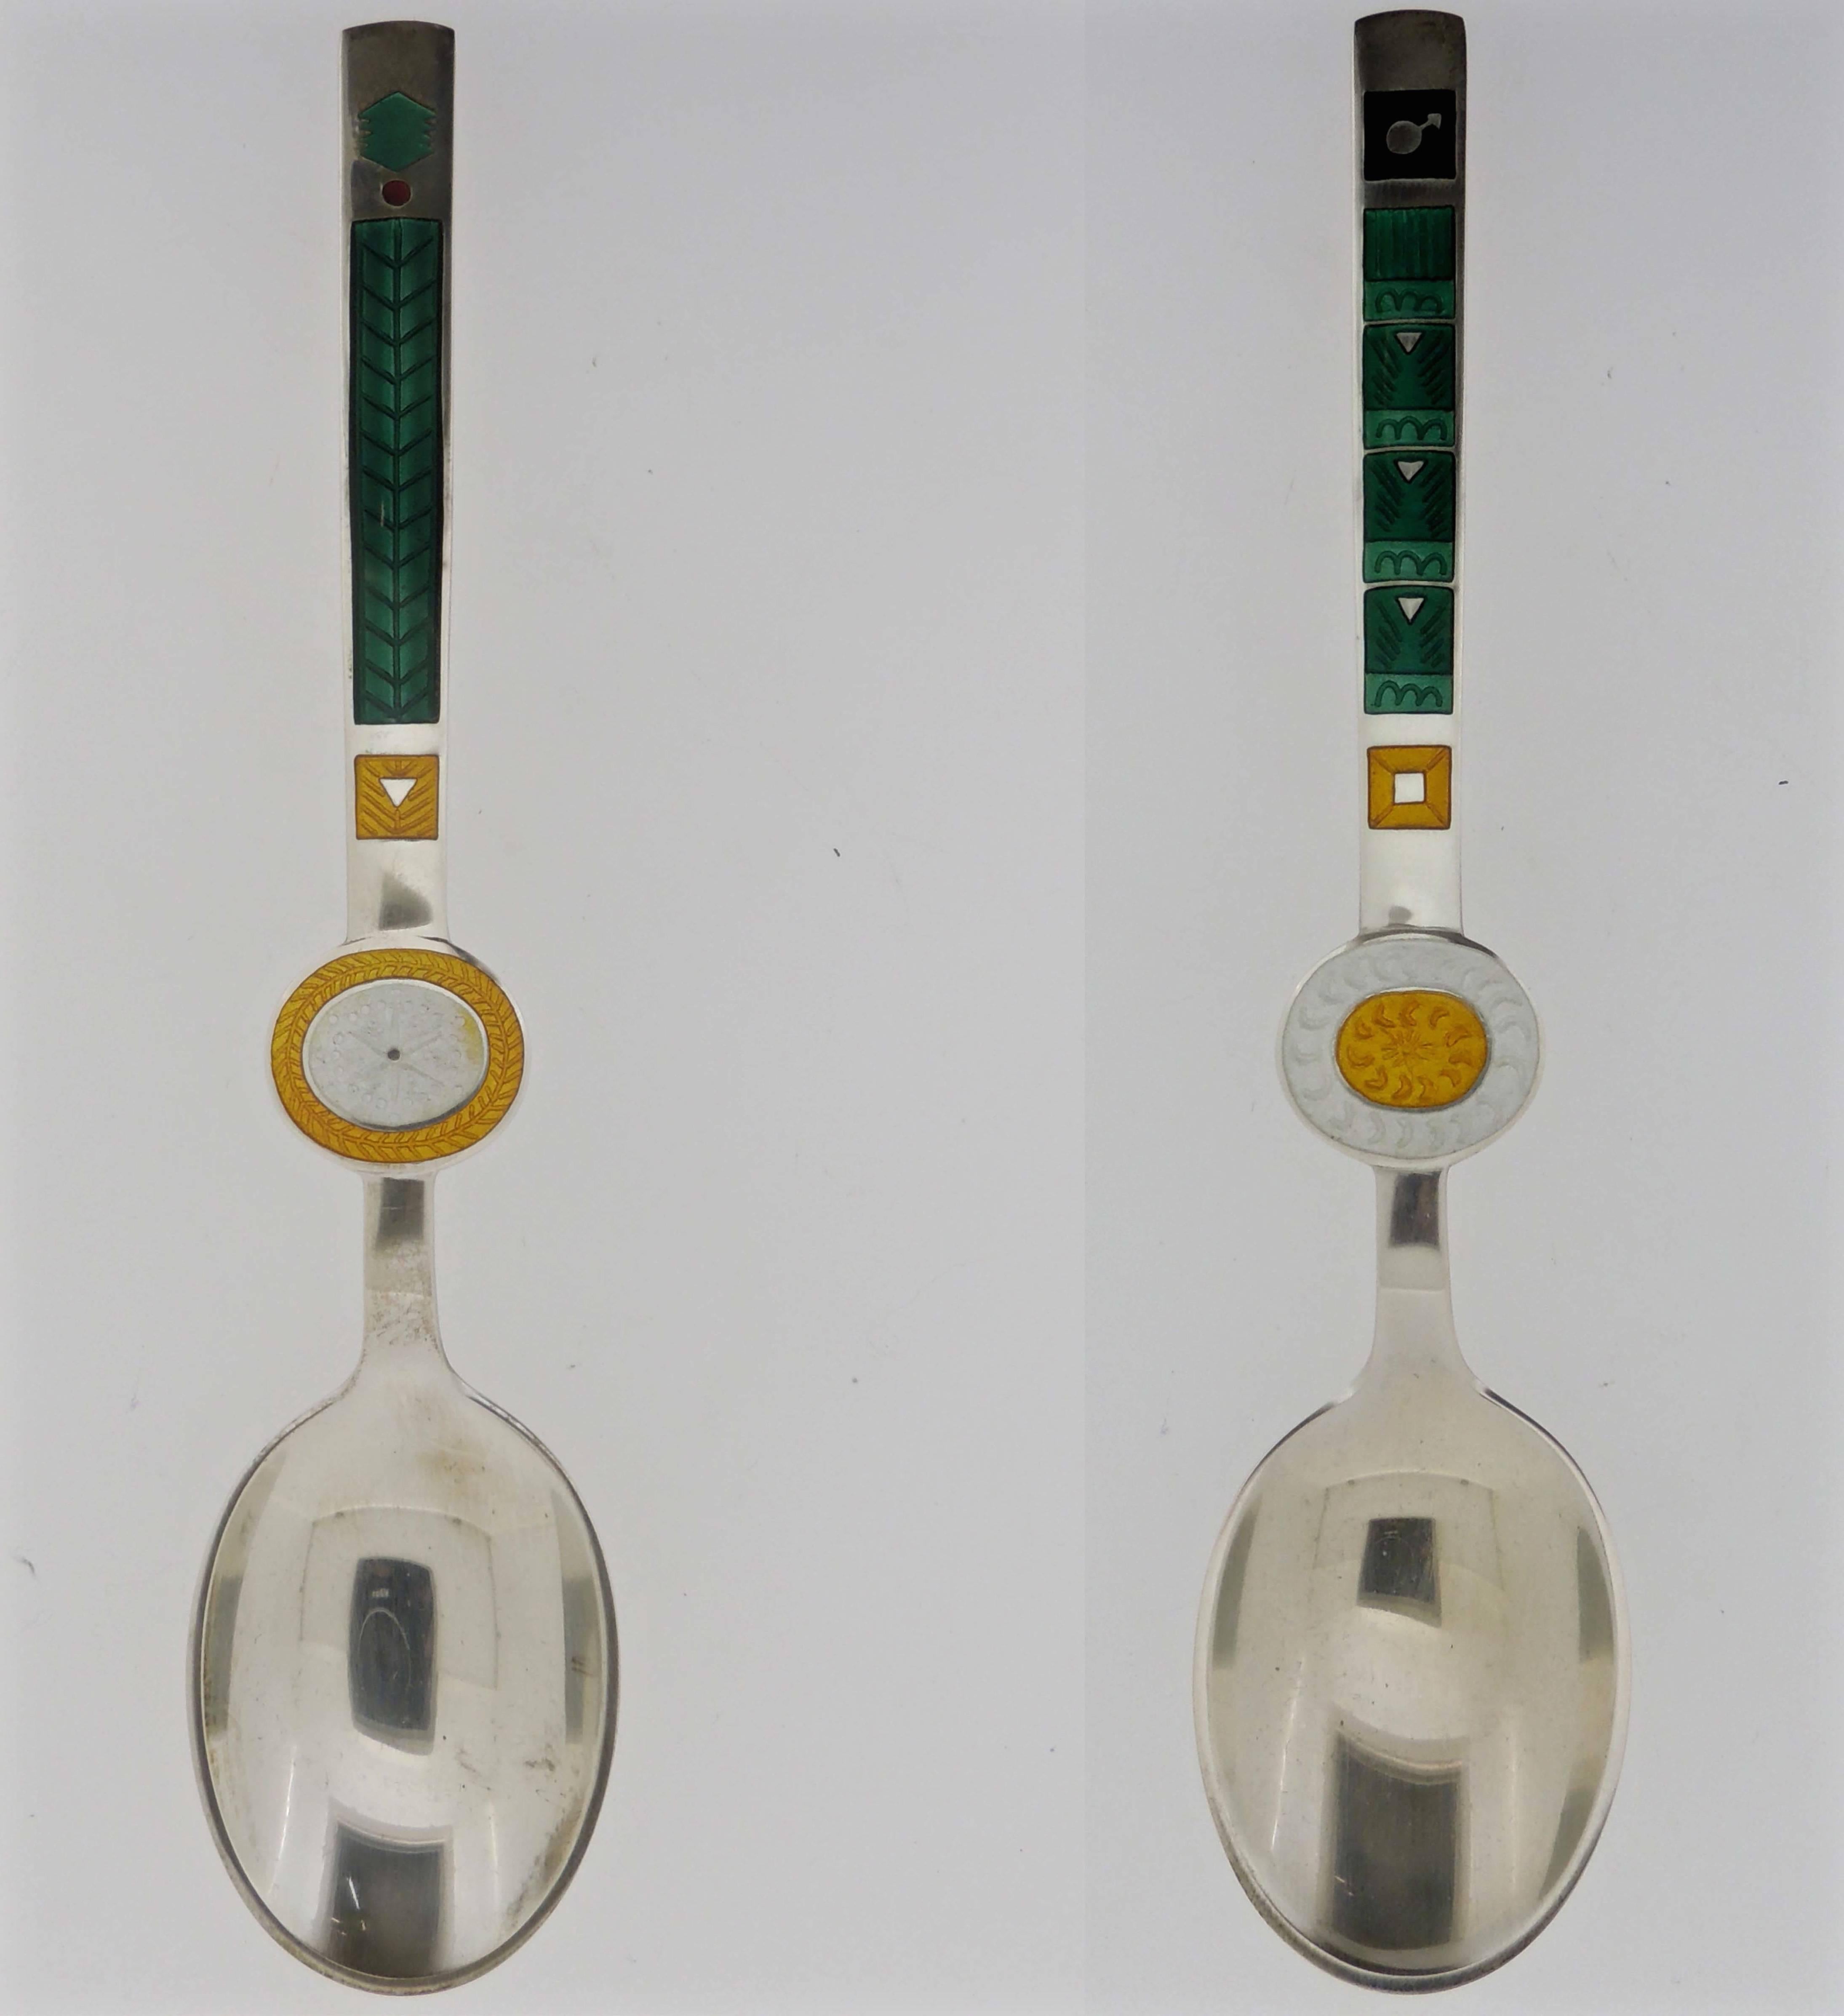 An complete set of 12 sterling silver and enamel Zodiac spoons by Paul Rene Gauguin for Anton Michelsen. Each spoon is decorated with a modernist enamel design on the front and numbered sequentially 1 through 12 on the reverse. 

Reverse marked: A.